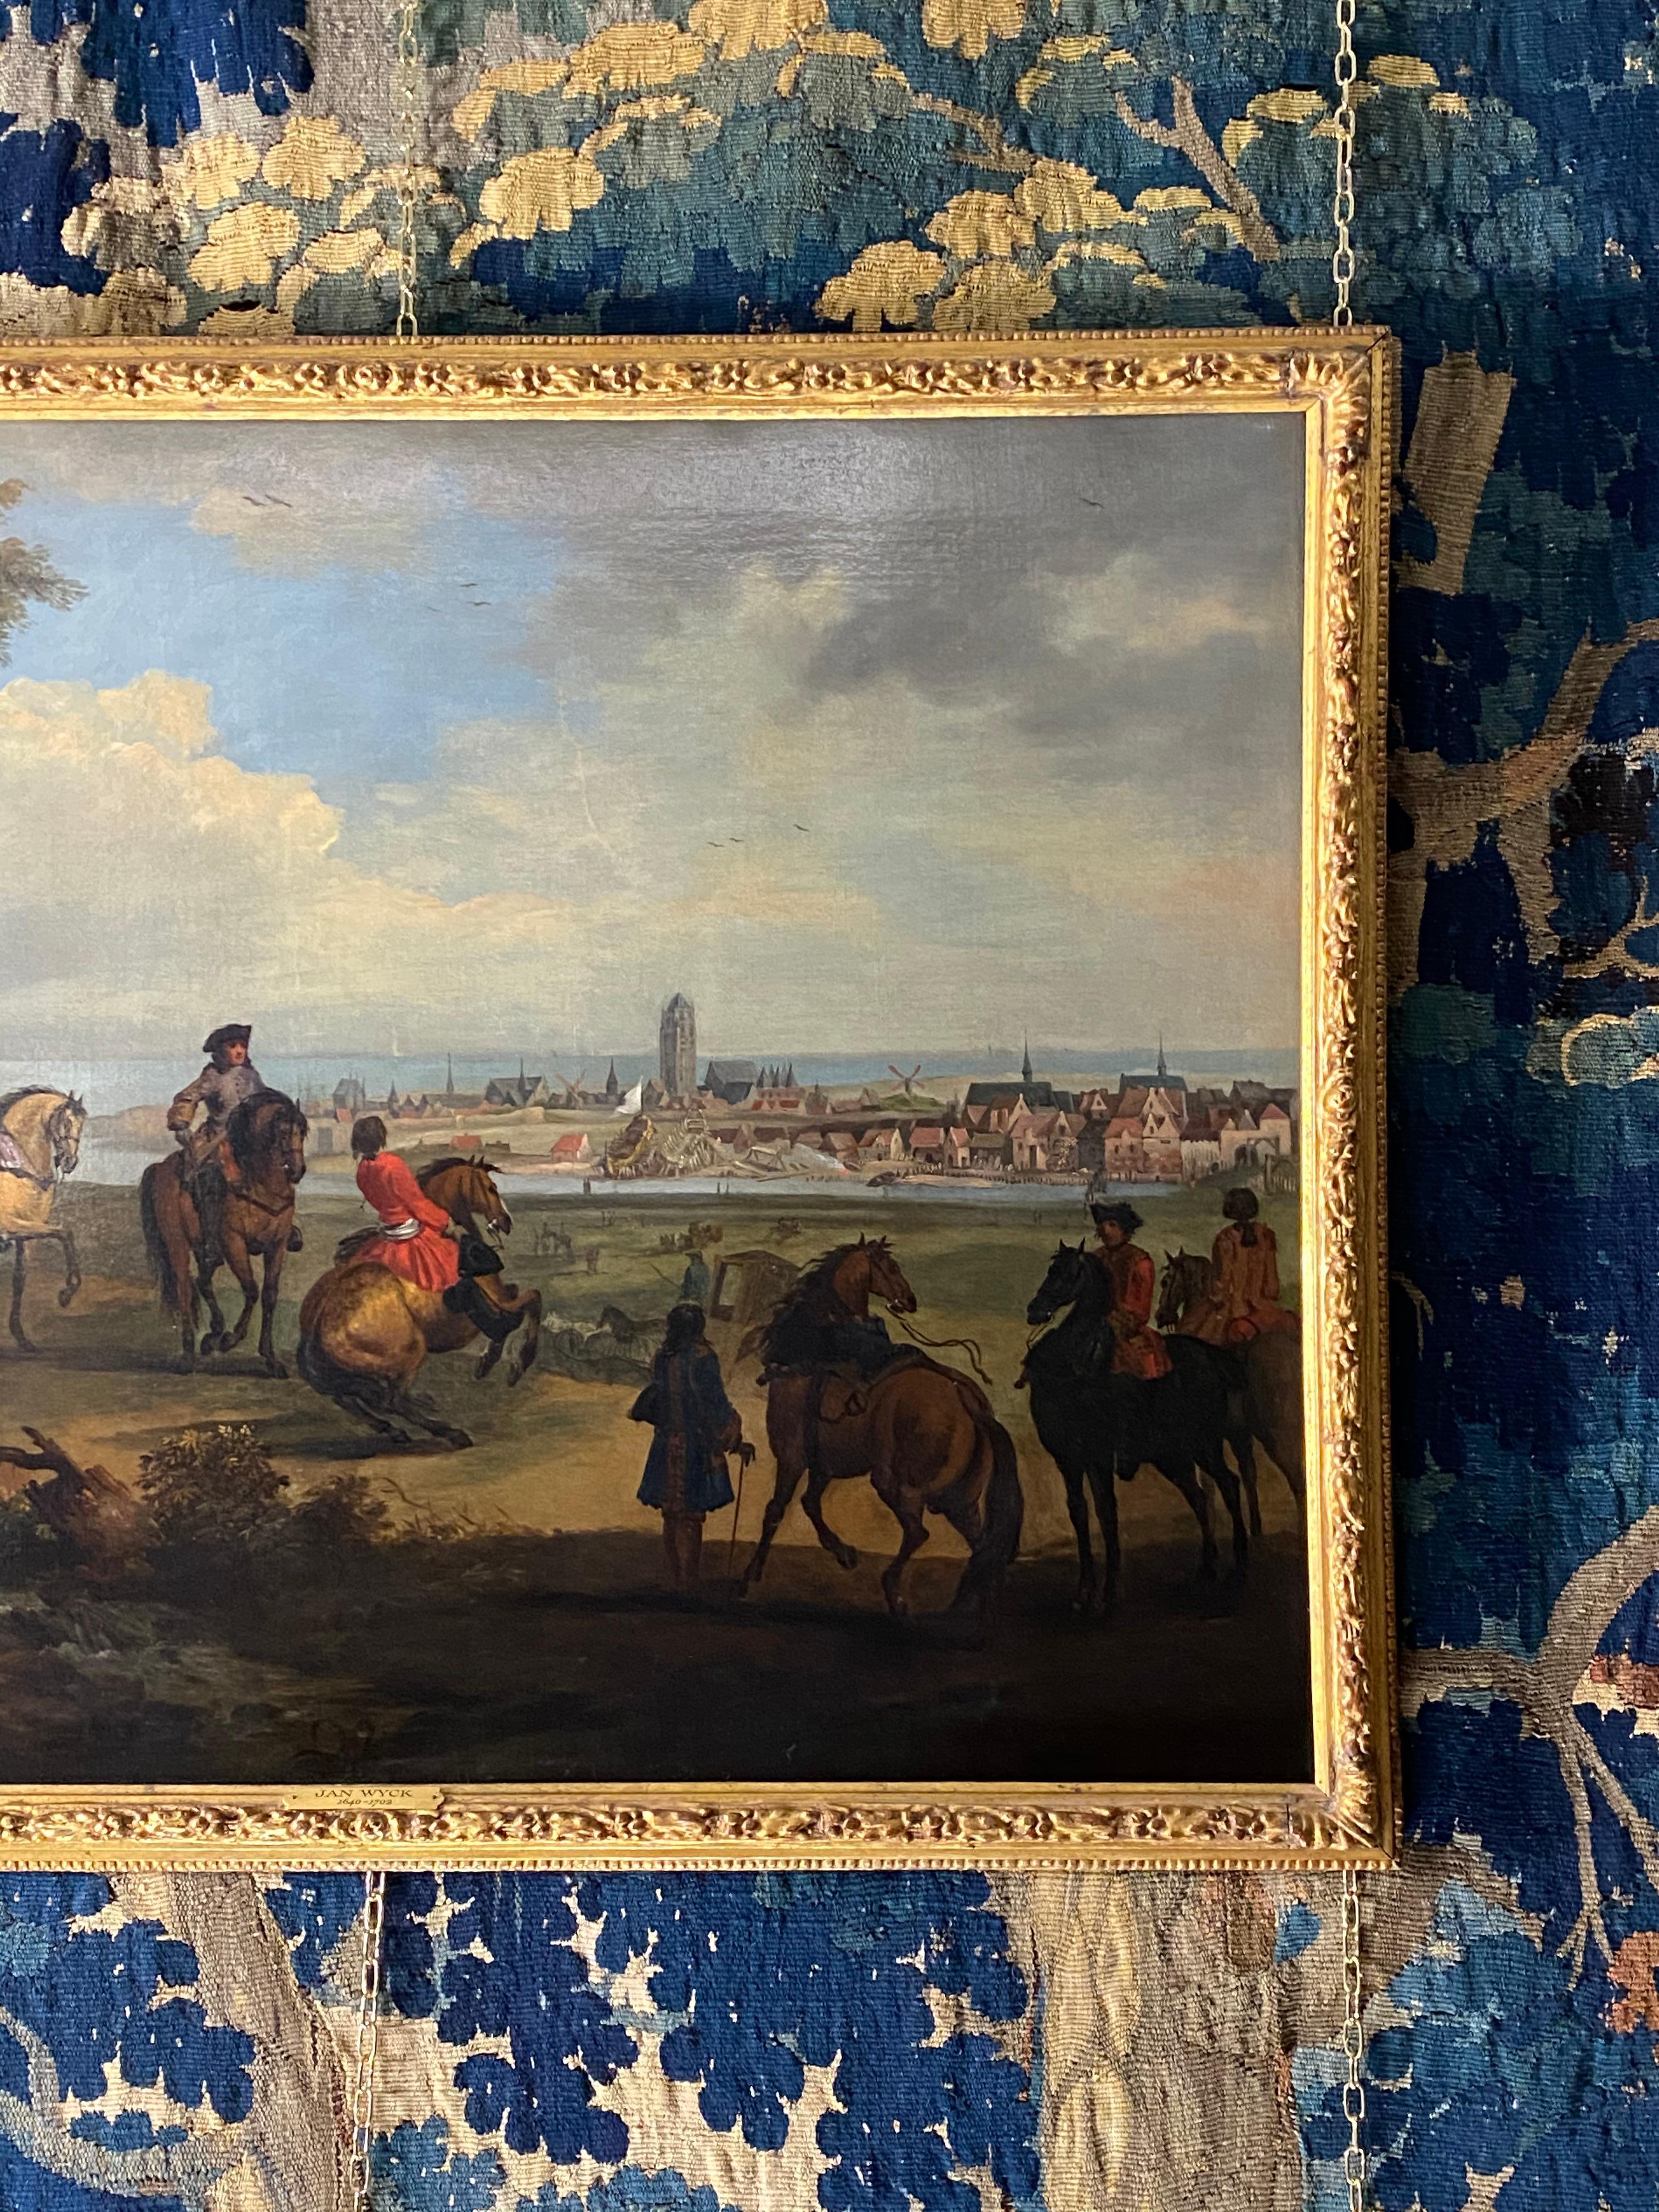 We are thrilled to offer this fine and highly detailed early eighteenth-century equestrian oil by an artist in the circle of Jan Wyck (1640-1702)

It depicts riders on their horses with handlers in a rustic dune landscape, in the background is a